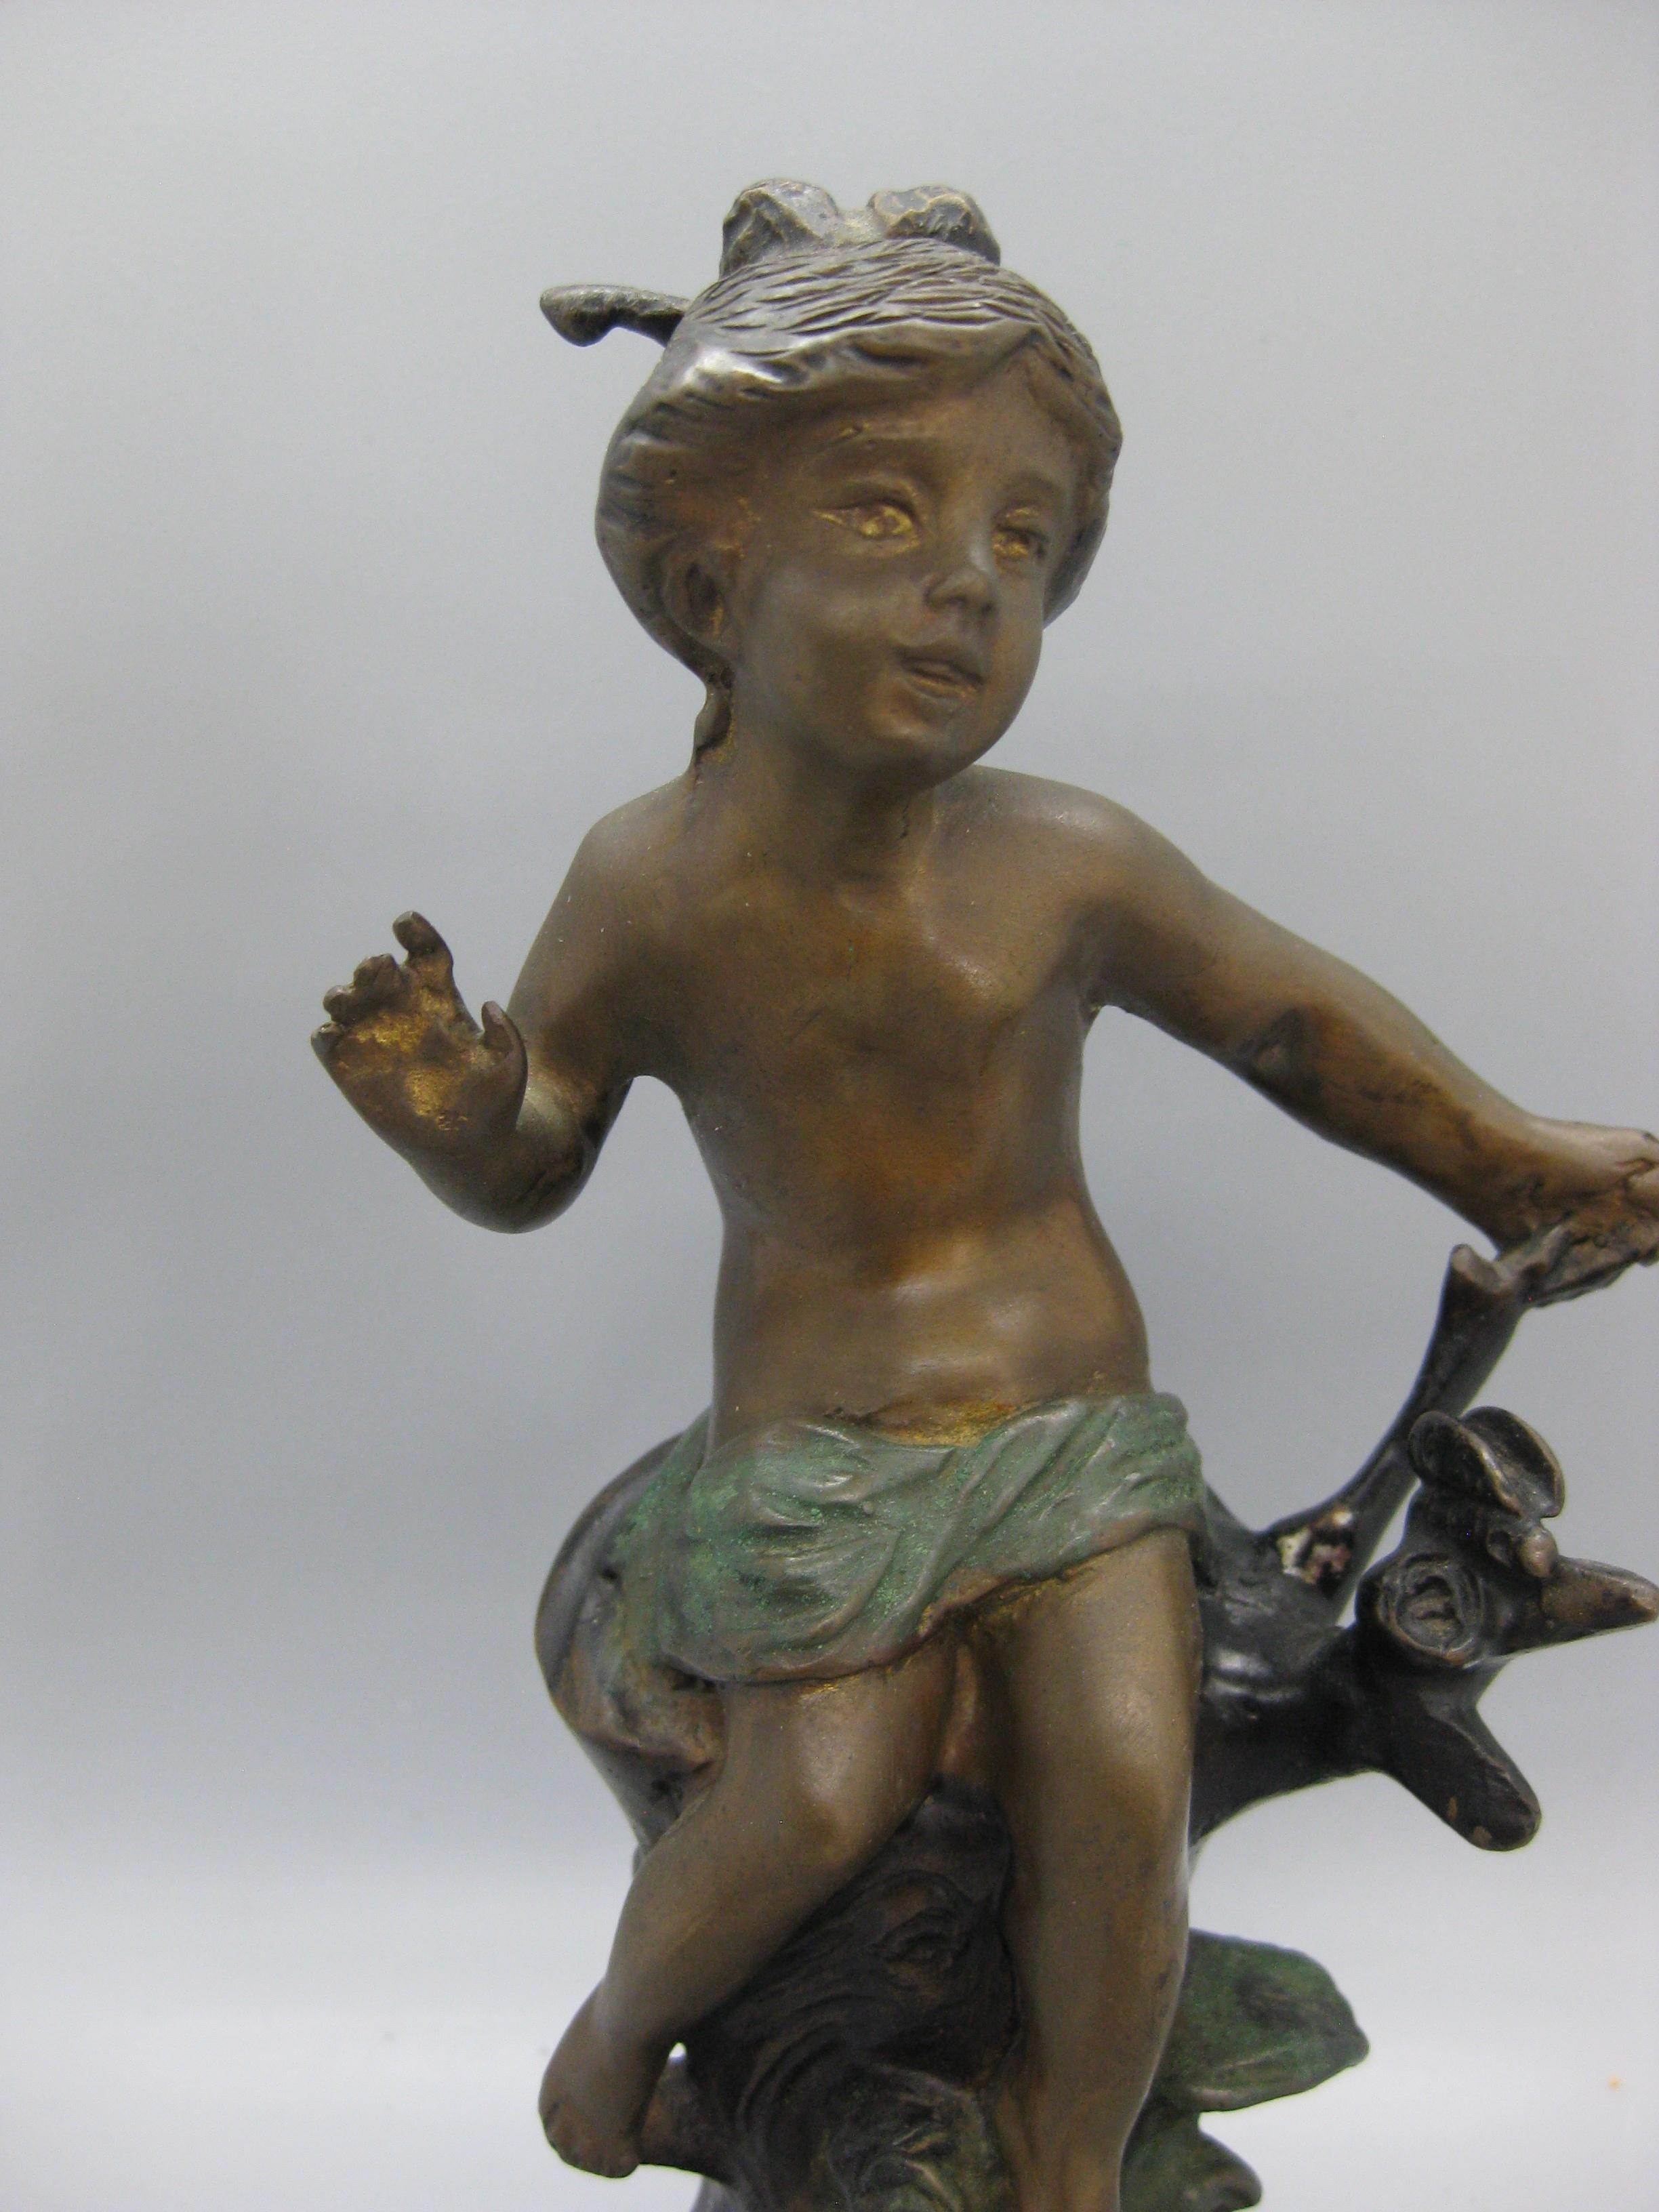 Beautiful Art Nouveau bronze sculpture by French artist Auguste Moreno. The sculpture is made of bronze with enamel painted accents. Signed on the back. Attached to a marble base. In very nice original condition and displays well.